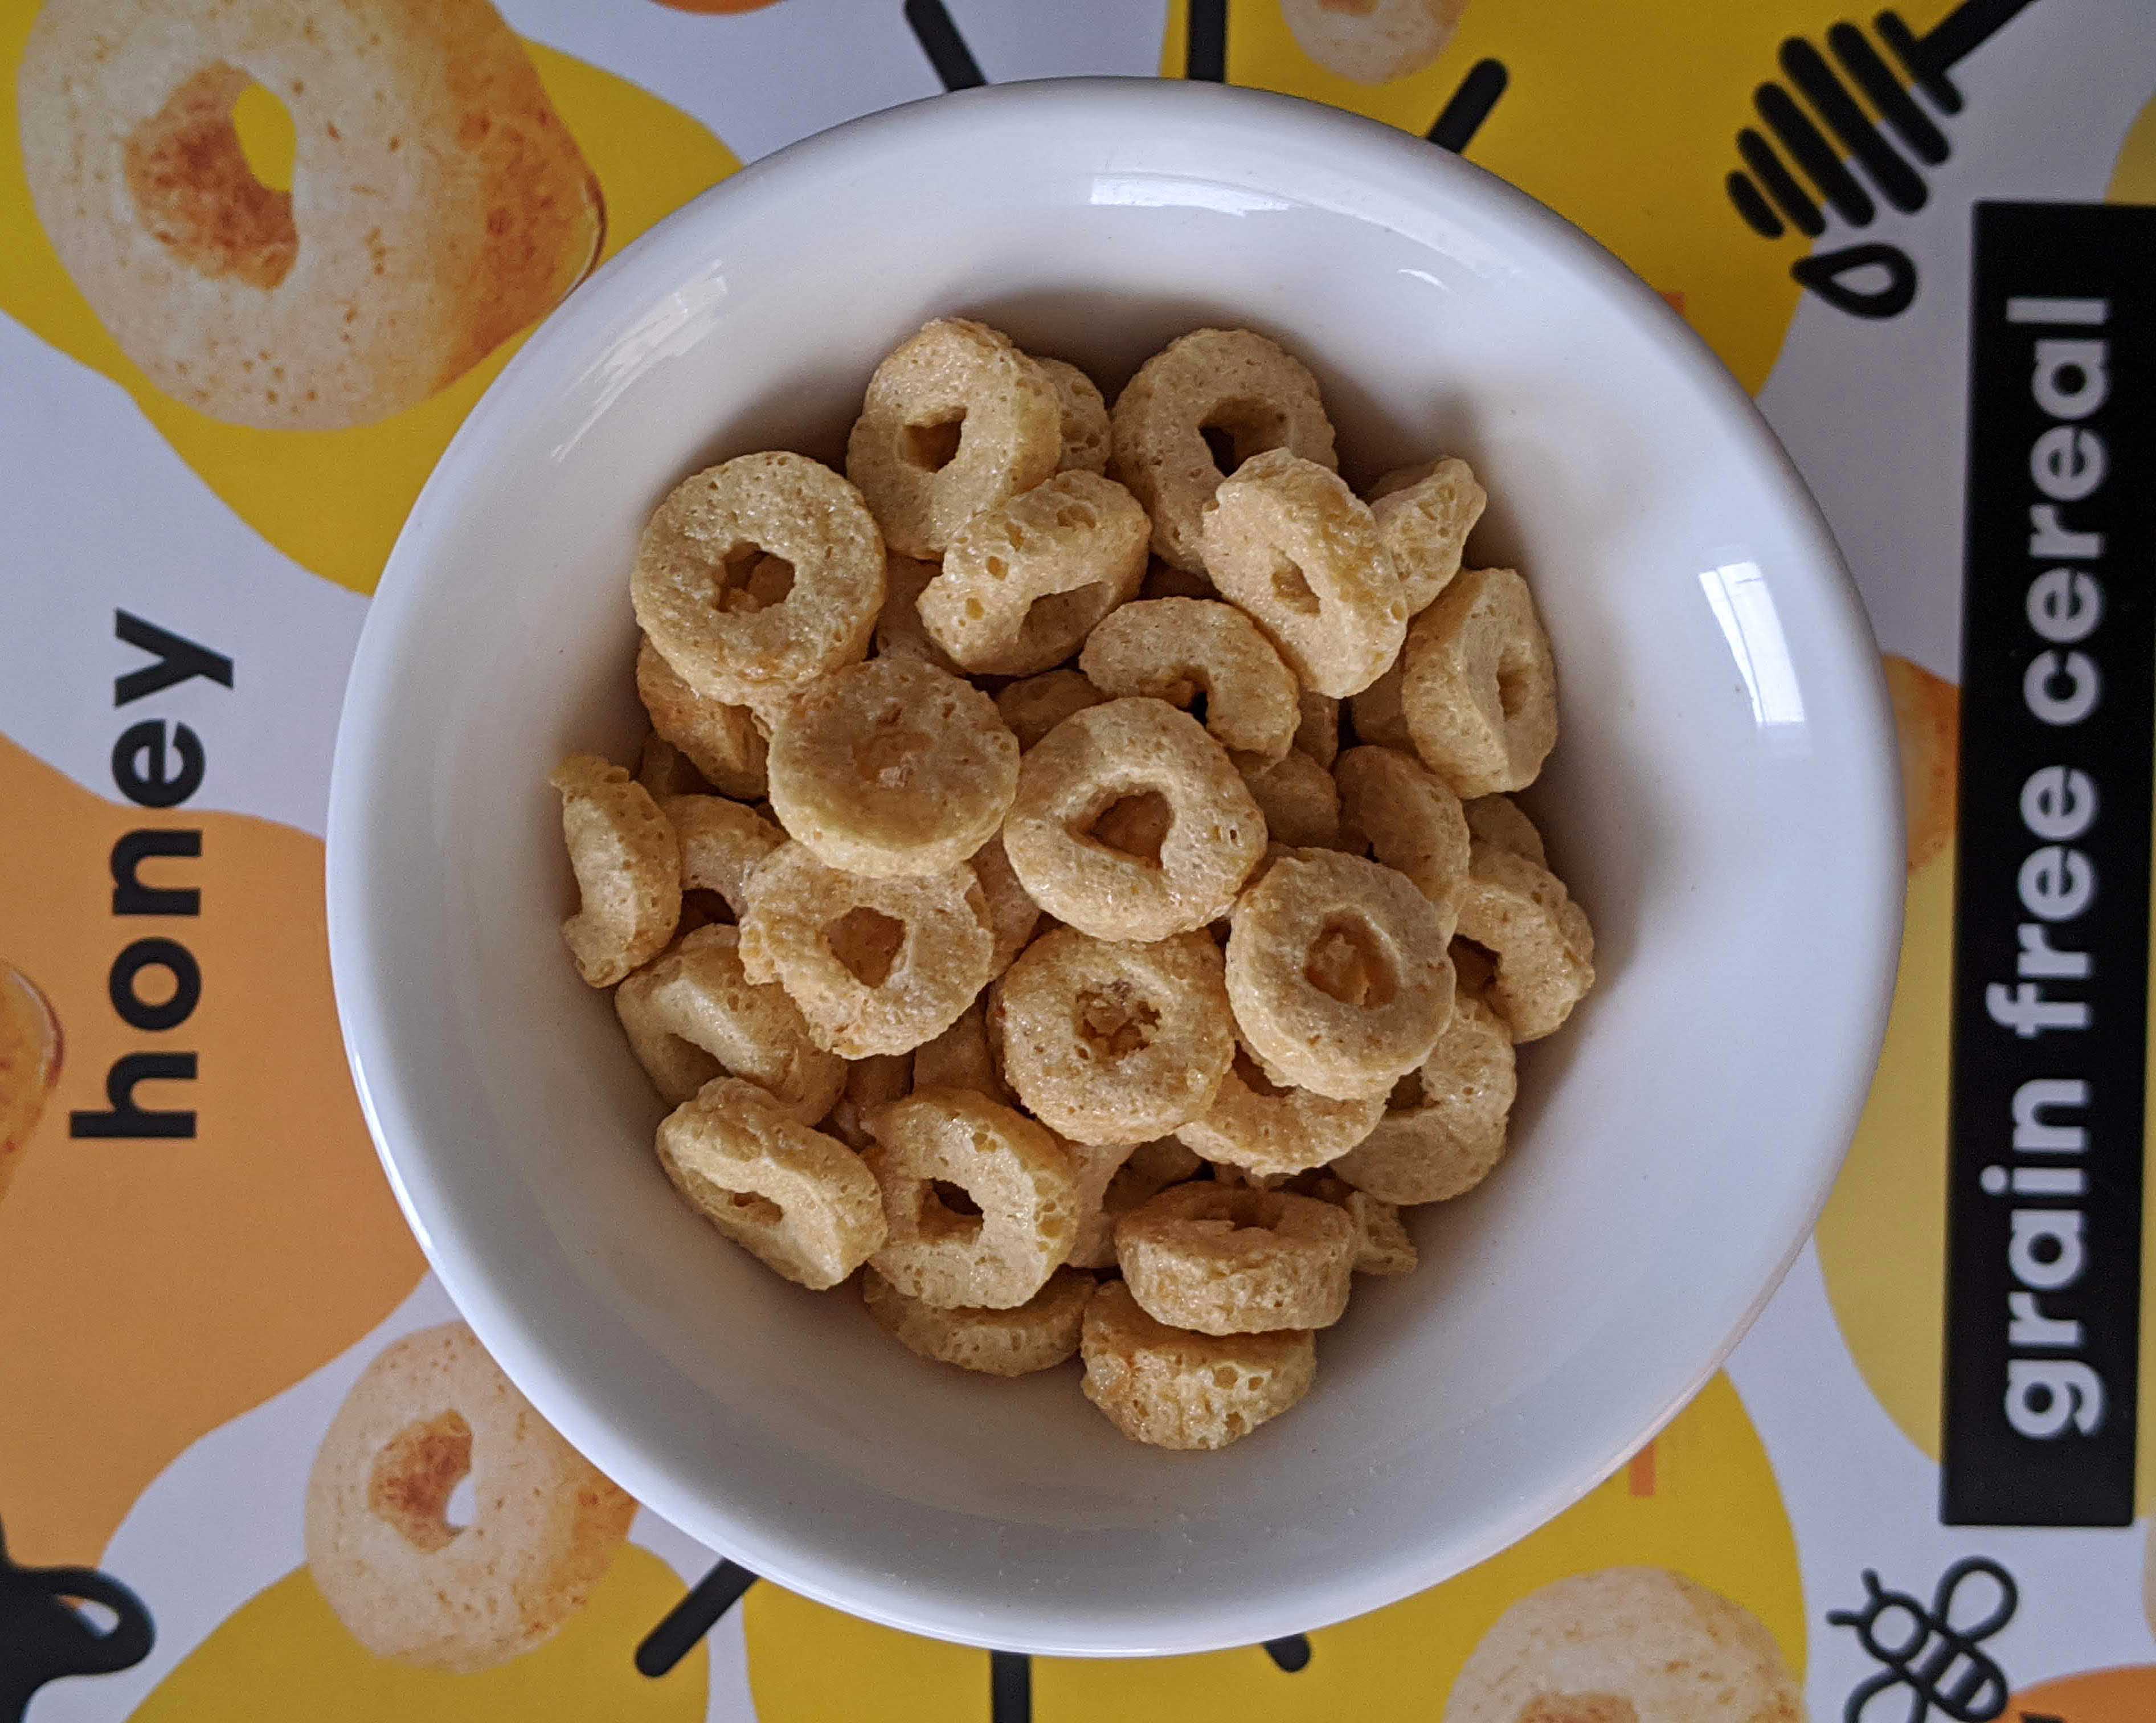 Three Wishes Healthy Cereal Review: High-Protein Cereal